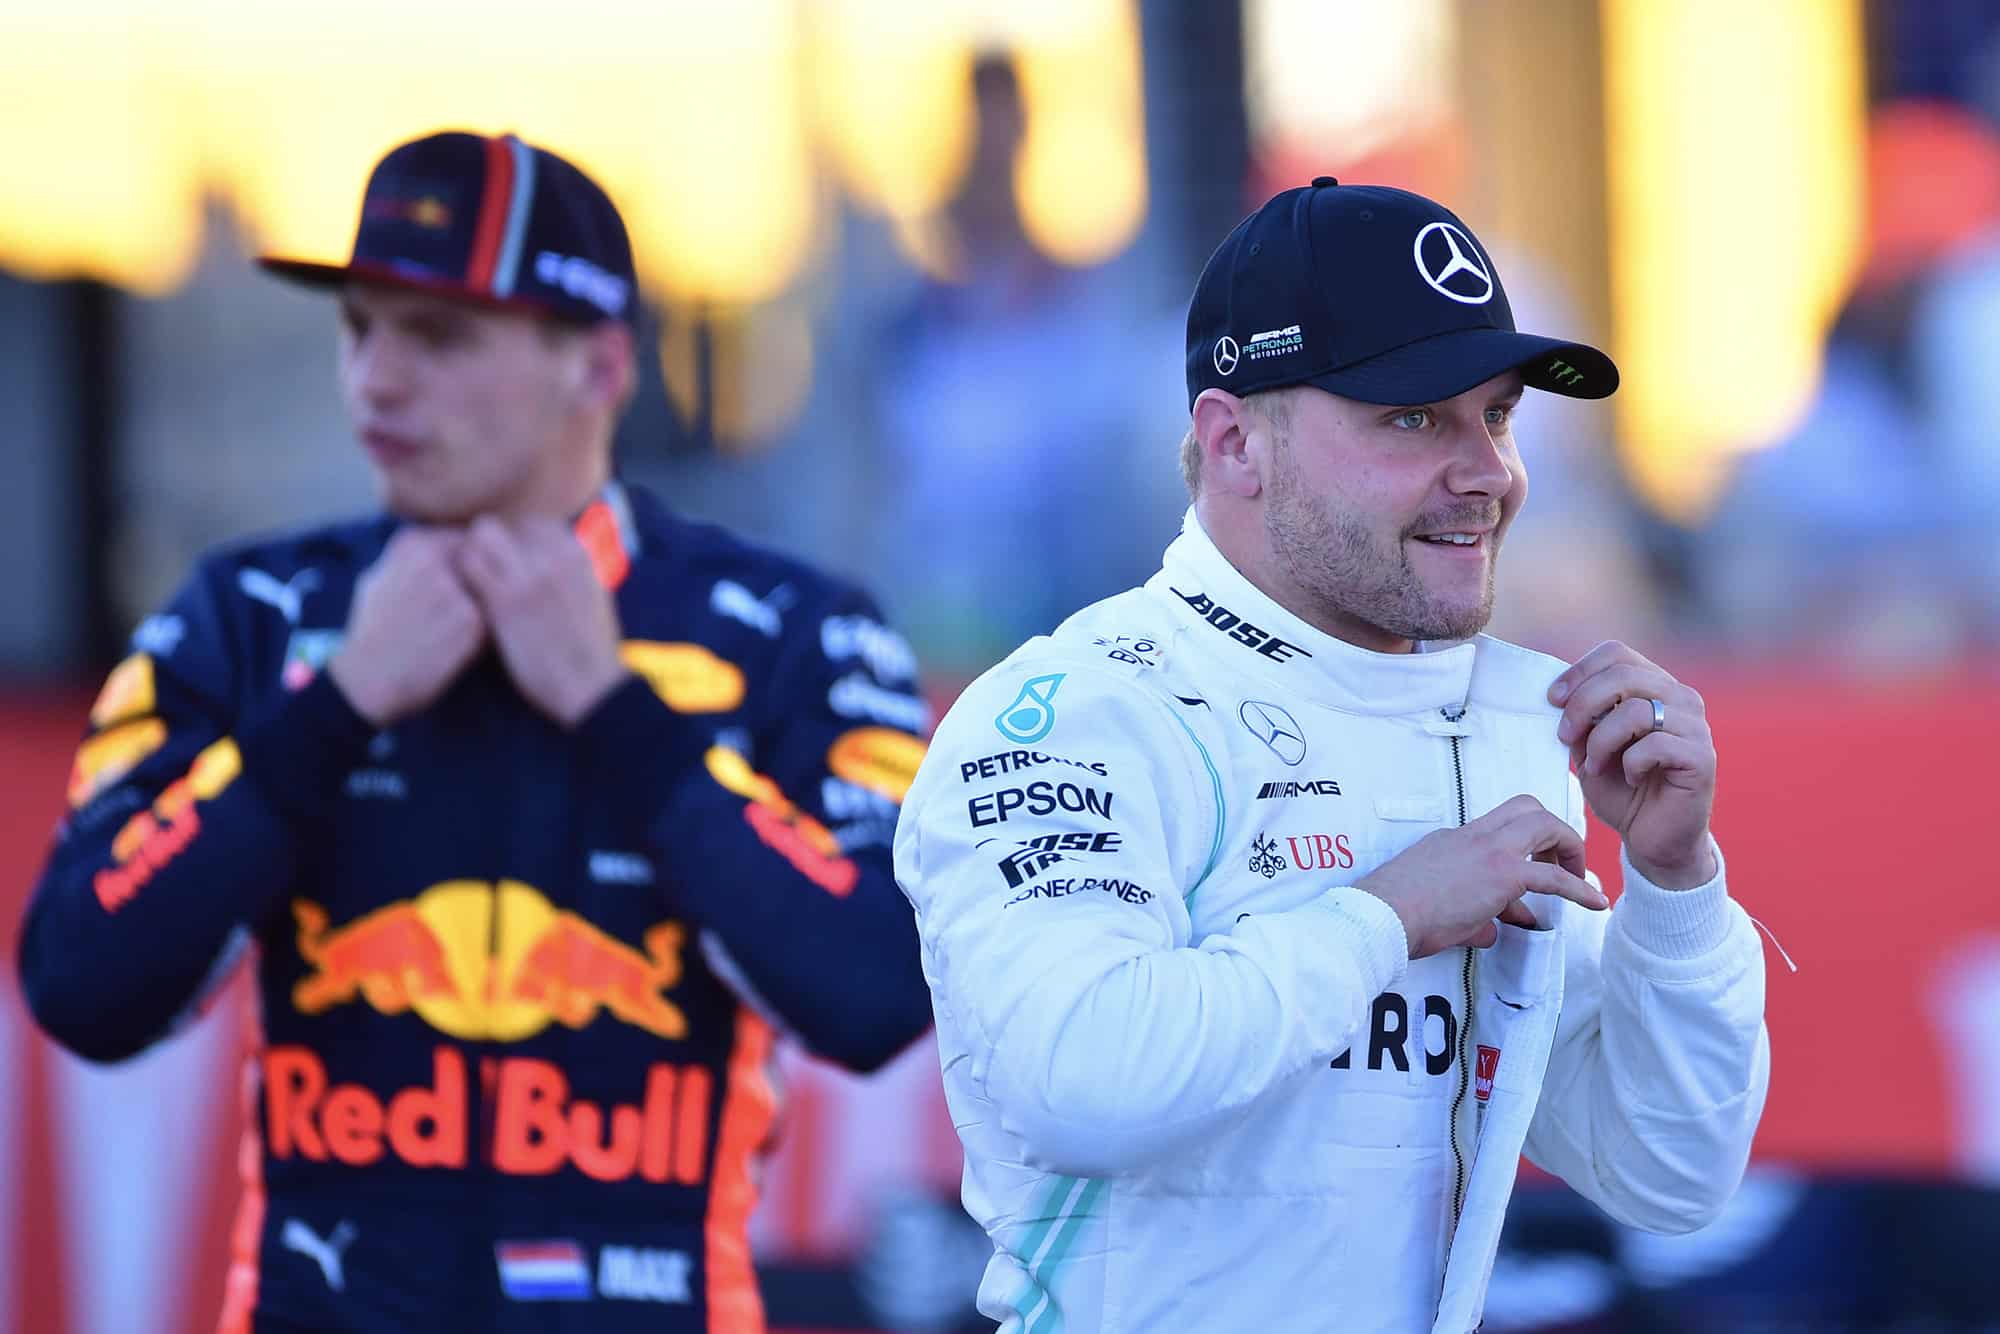 Valtteri Bottas with Max VErstappen in the background after qualifying for the 2019 US Grand Prix